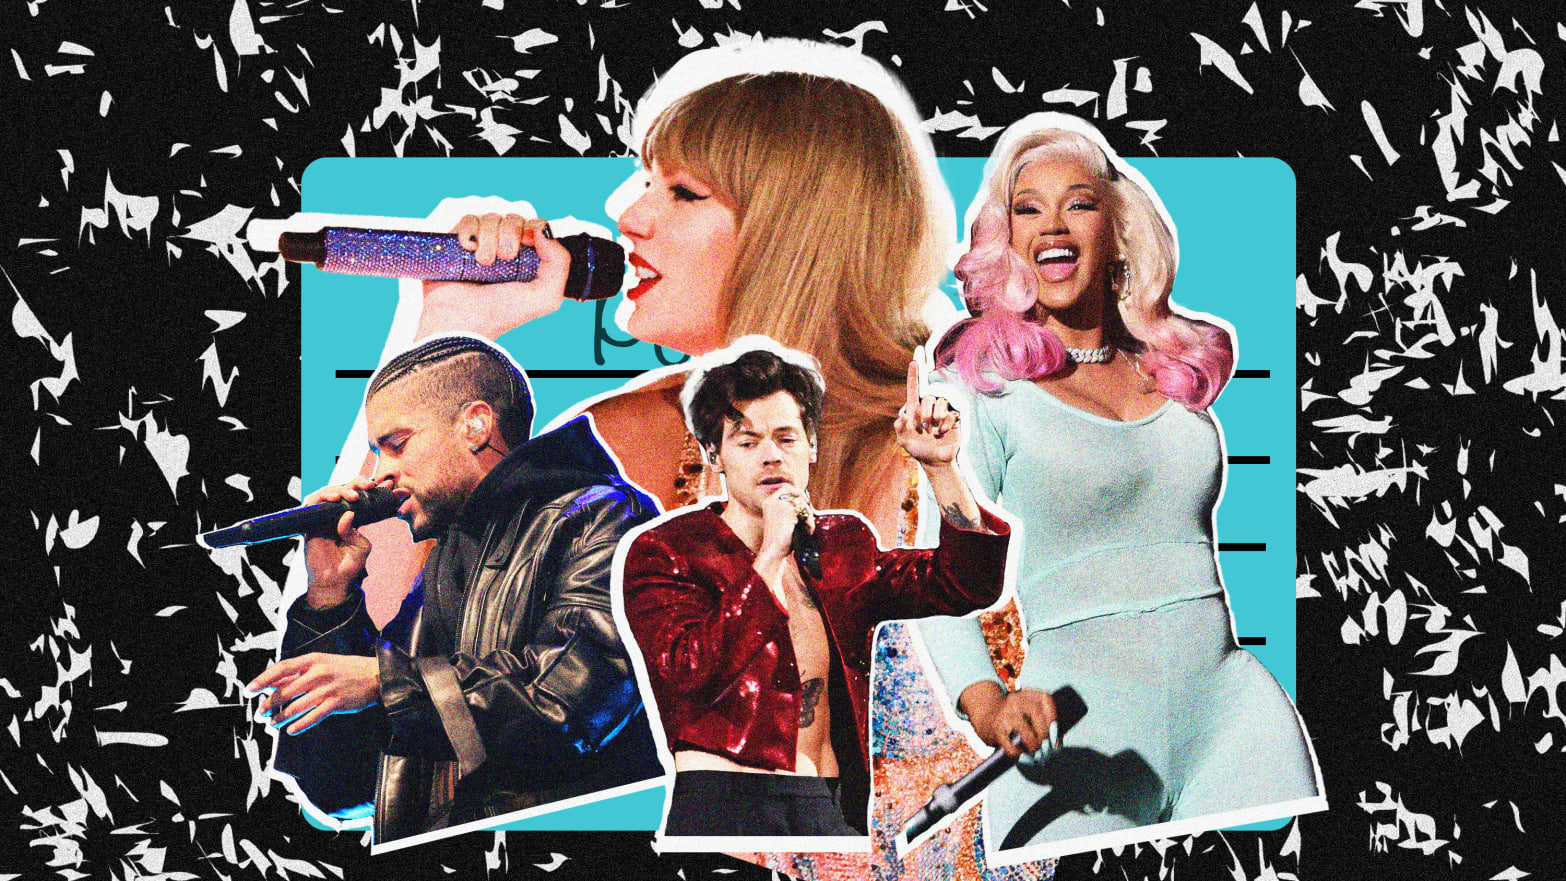 A photo illustration showing Taylor Swift, Cardi B, Bad Bunny and Harry Styles on a school notebook.